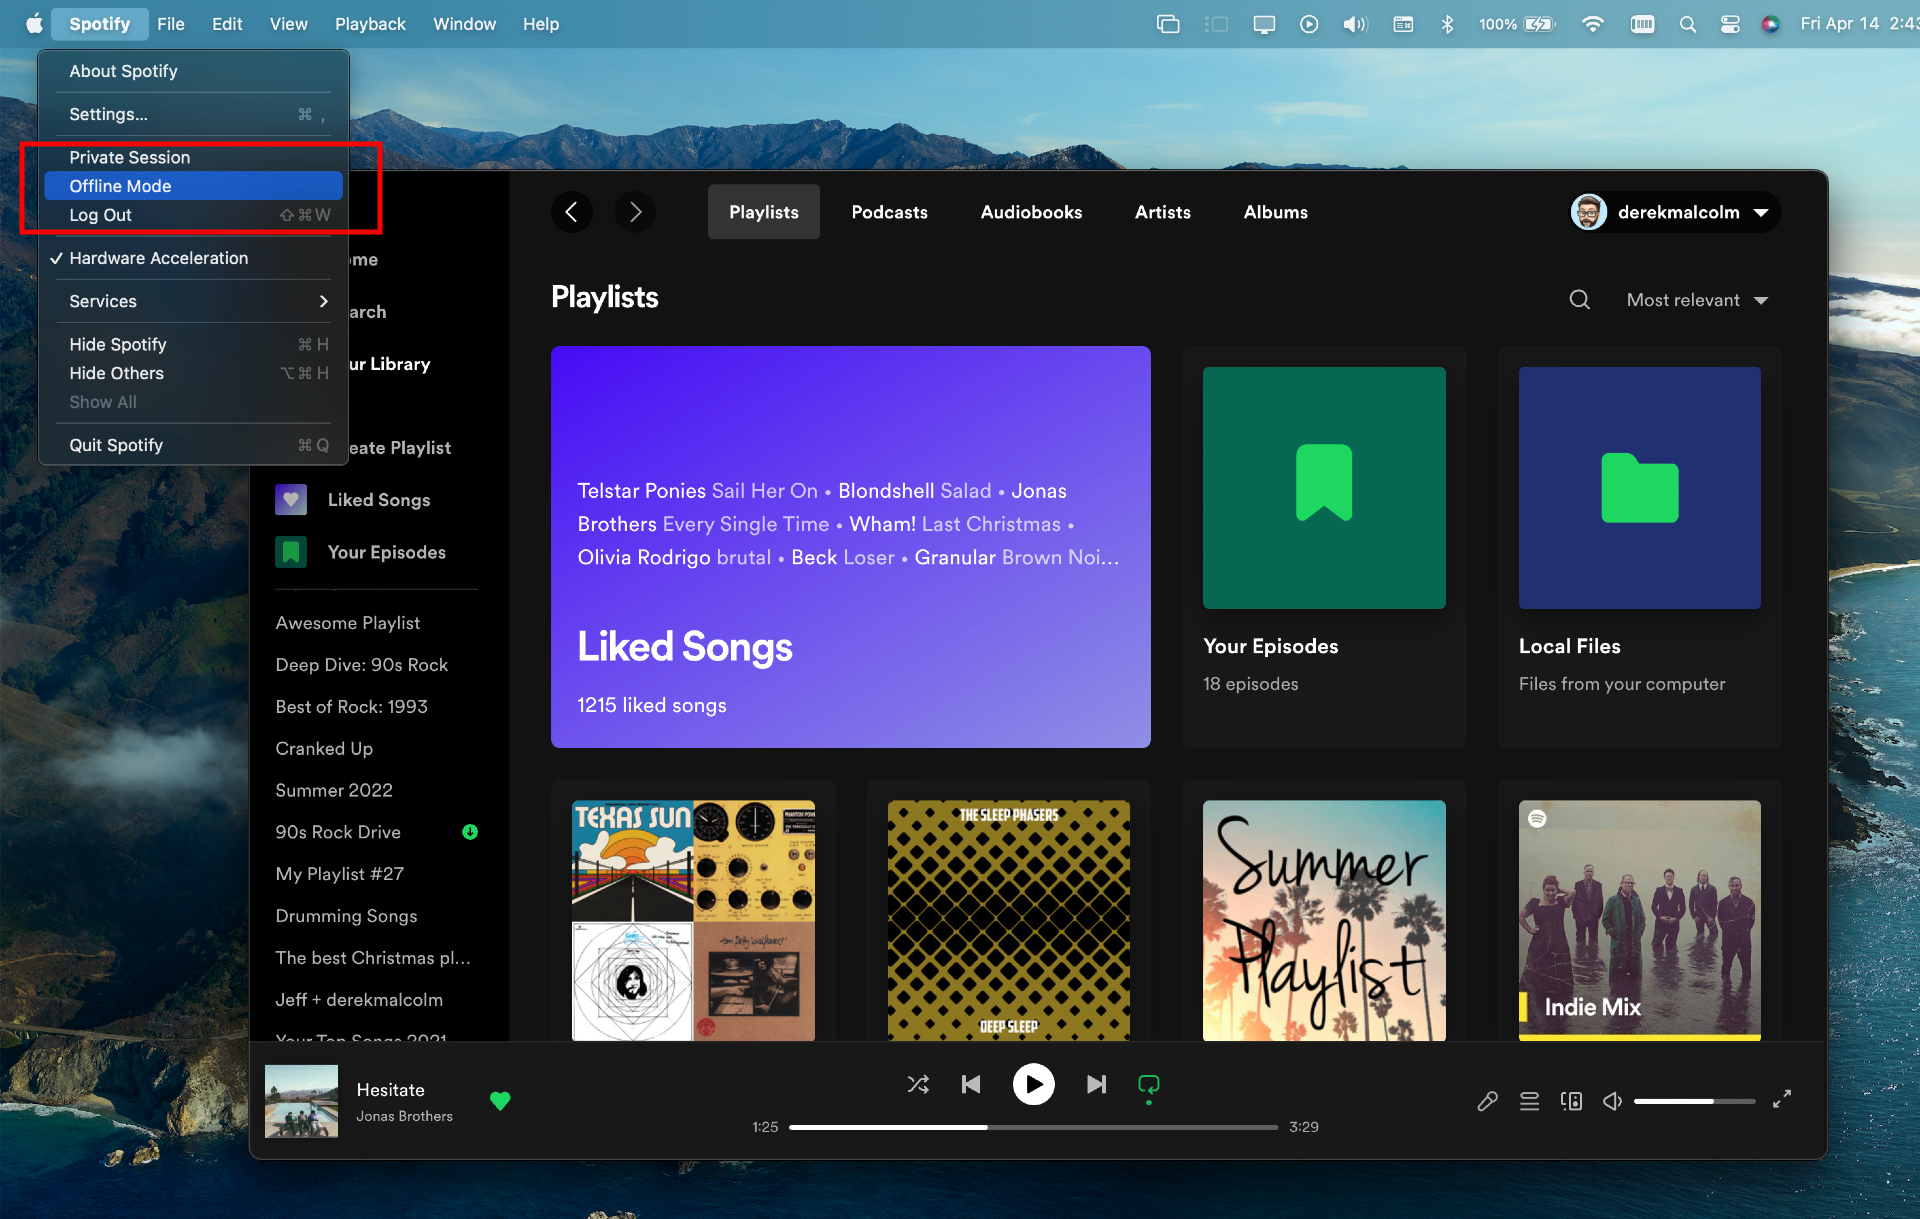 How to Use Spotify Offline on a Windows 10 PC or Mac